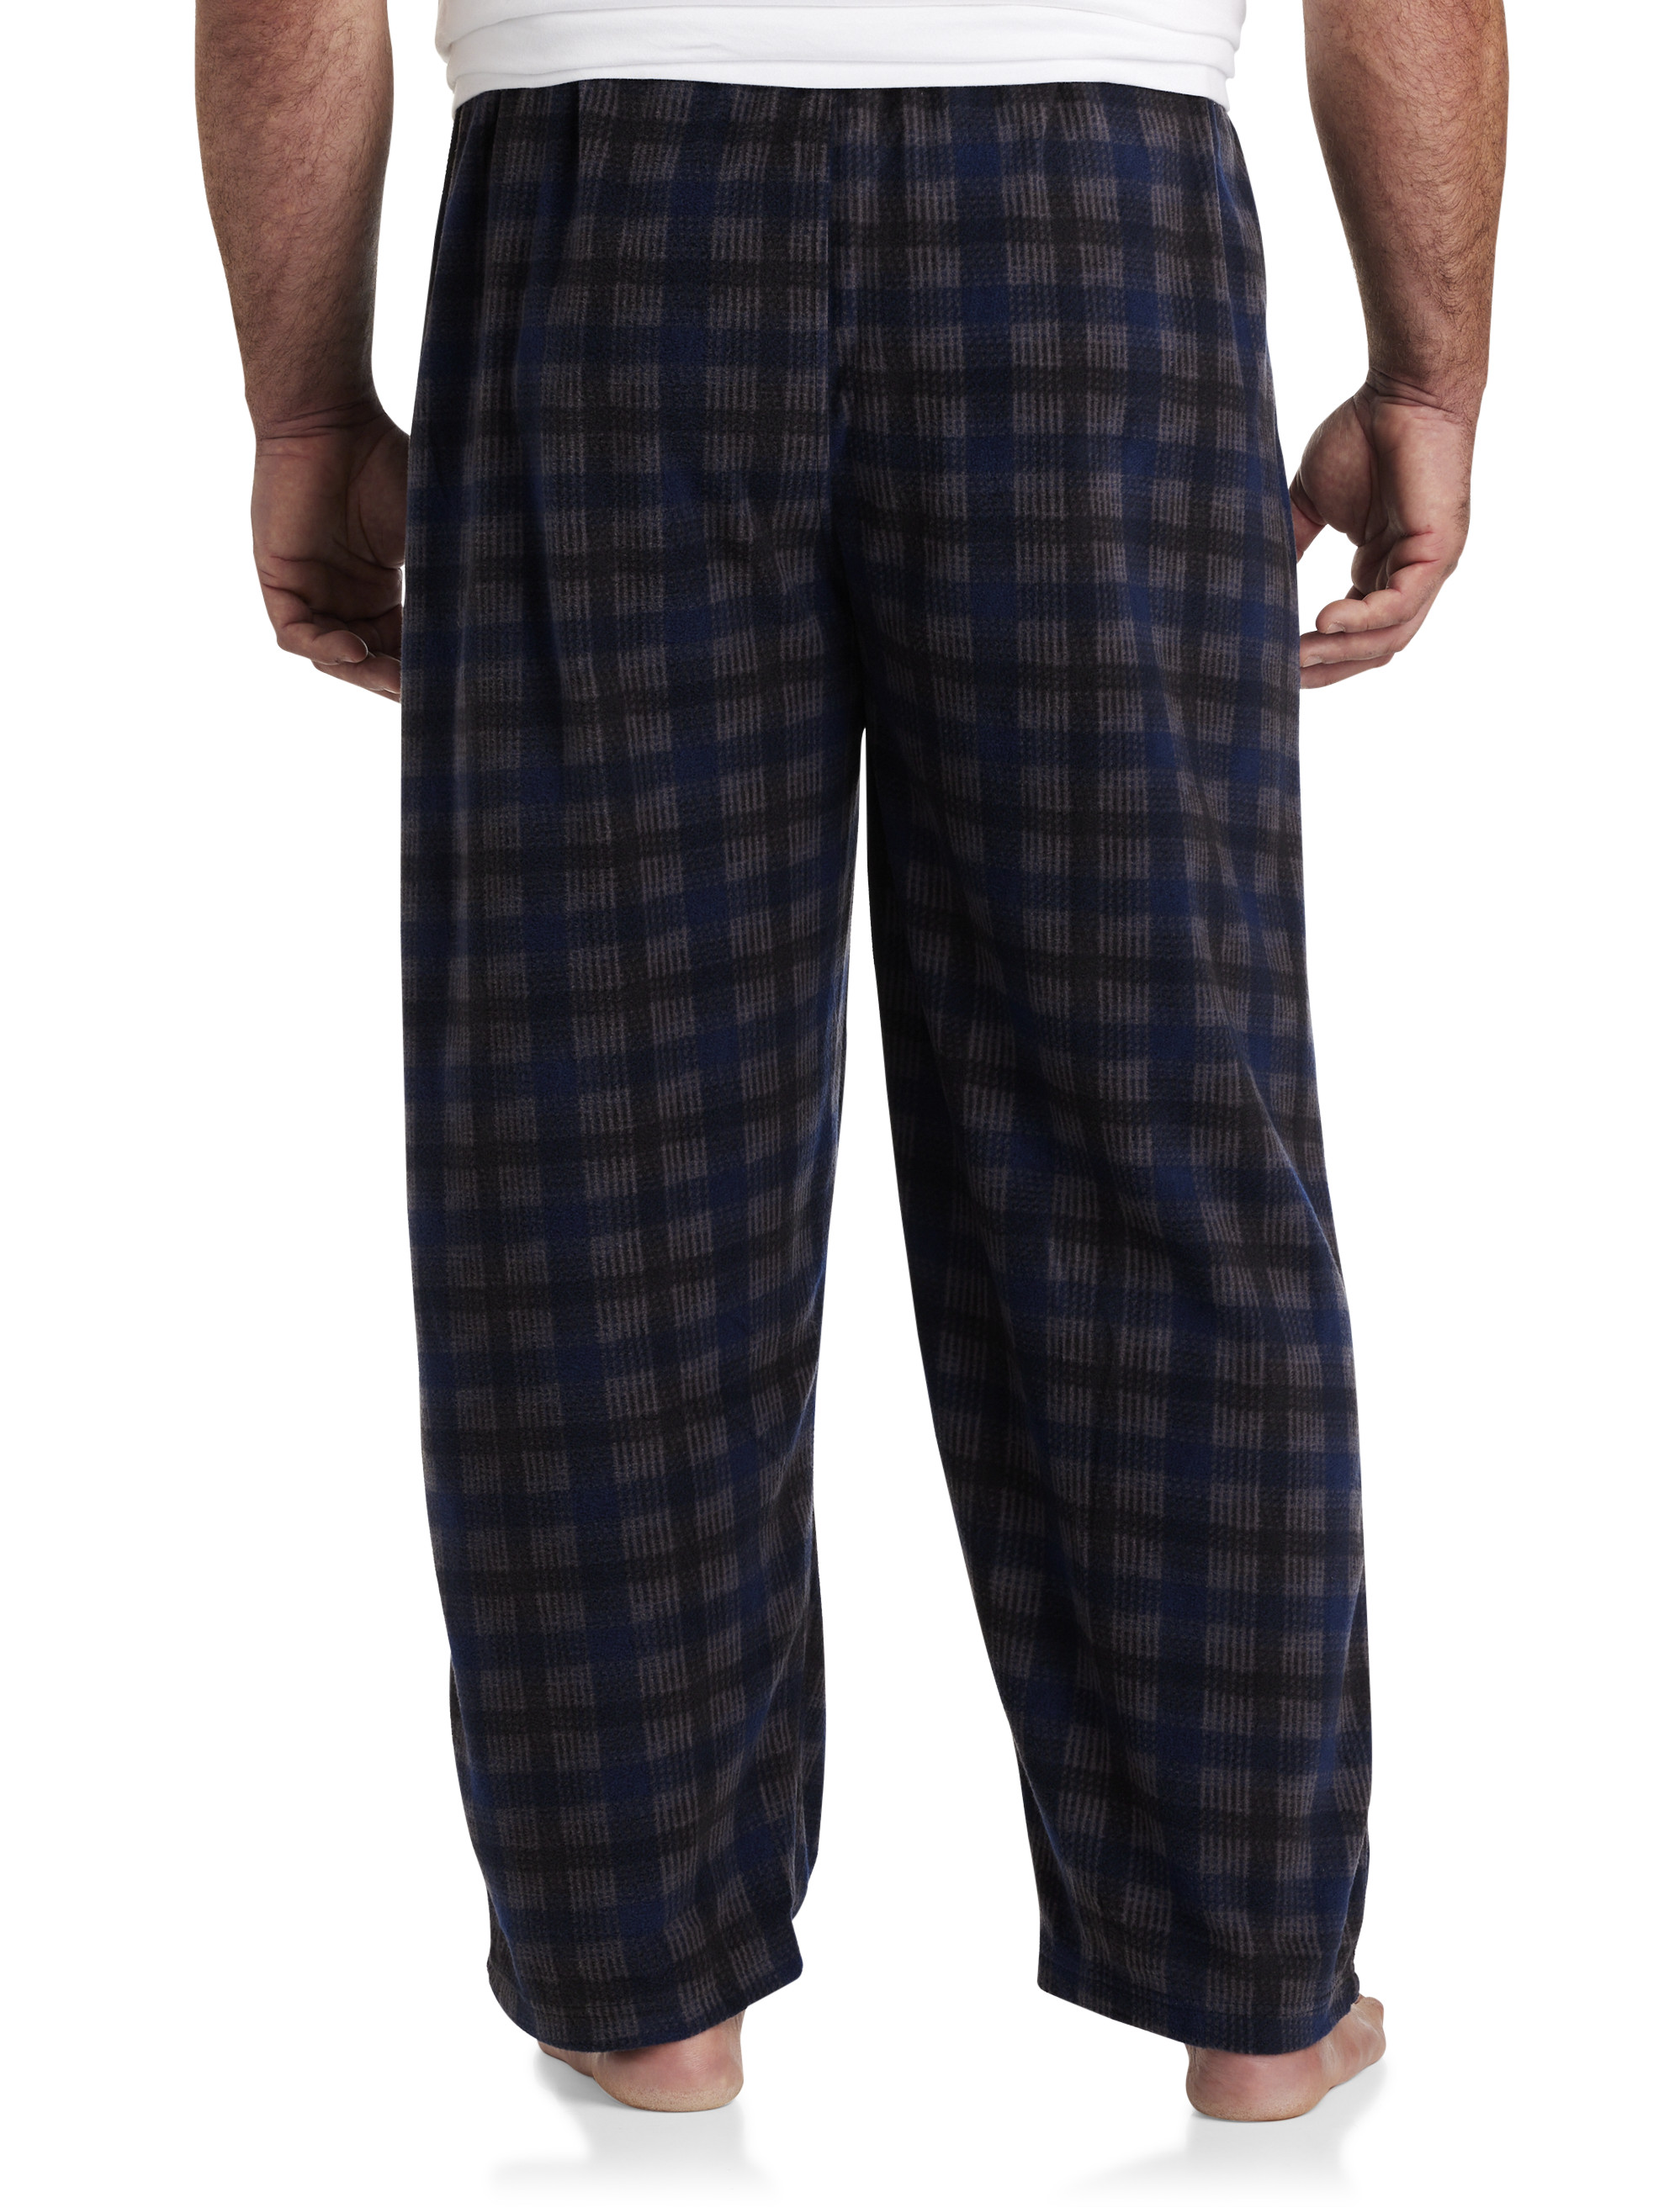  Turquoise Teal Green Black Plaid Cotton Men's Pajama Pants  Lounge Sleepwear Pants Bottoms with Pockets : Clothing, Shoes & Jewelry